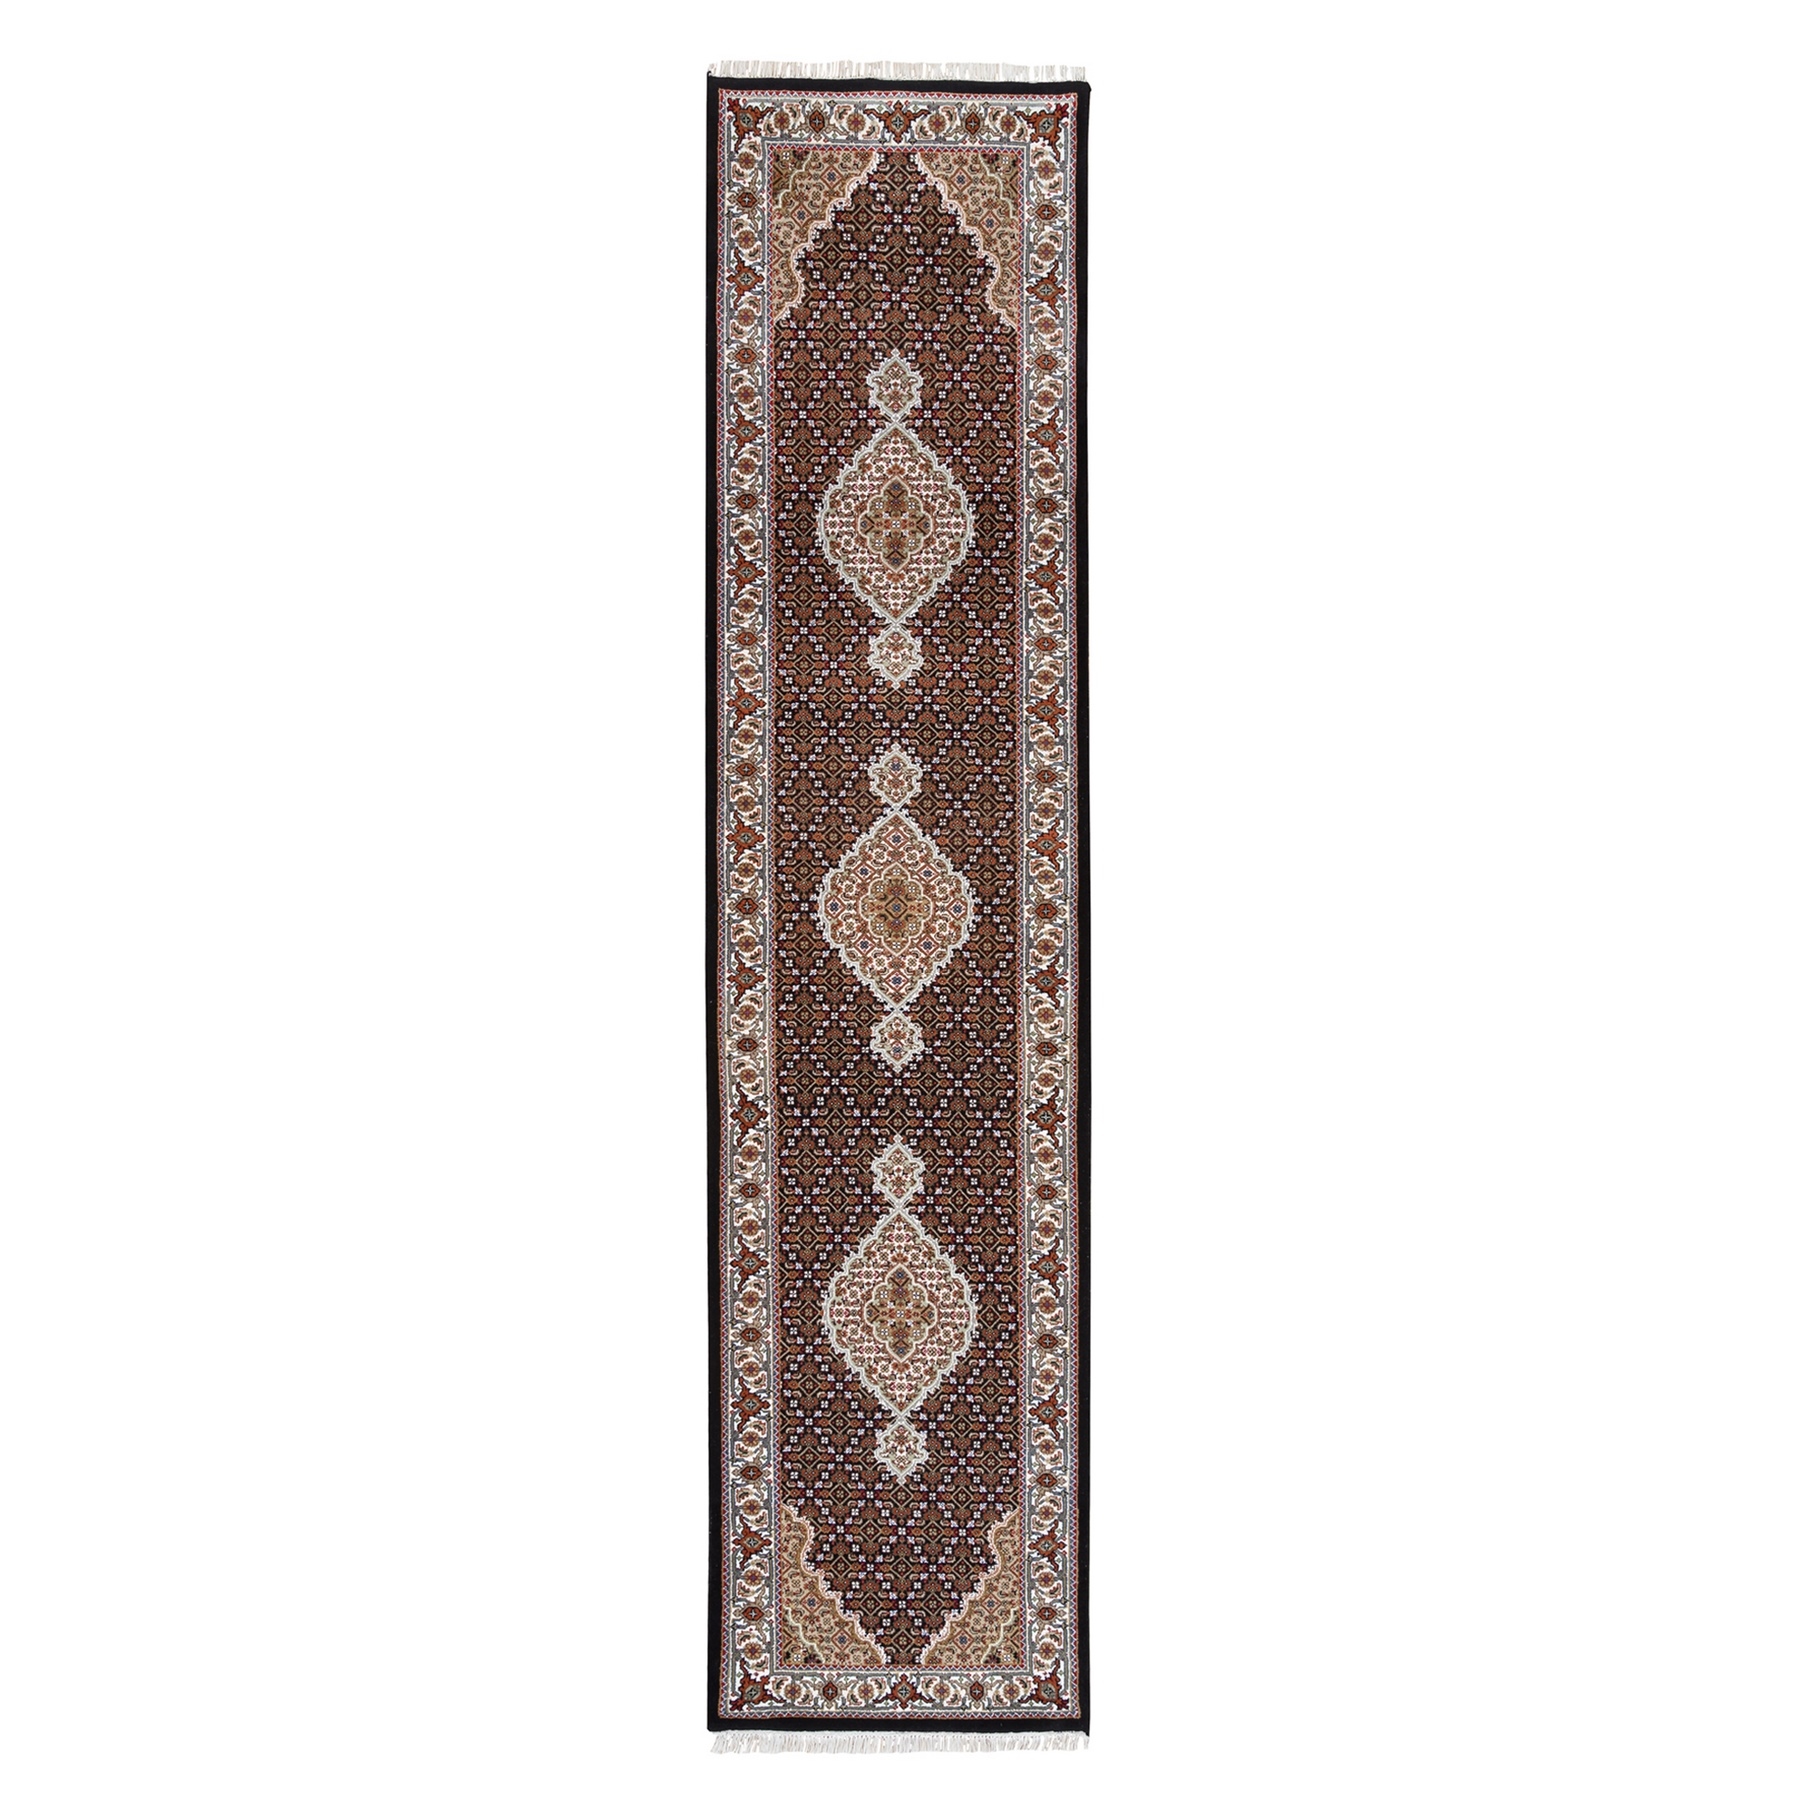 Pirniakan Collection Hand Knotted Black Rug No: 1125038